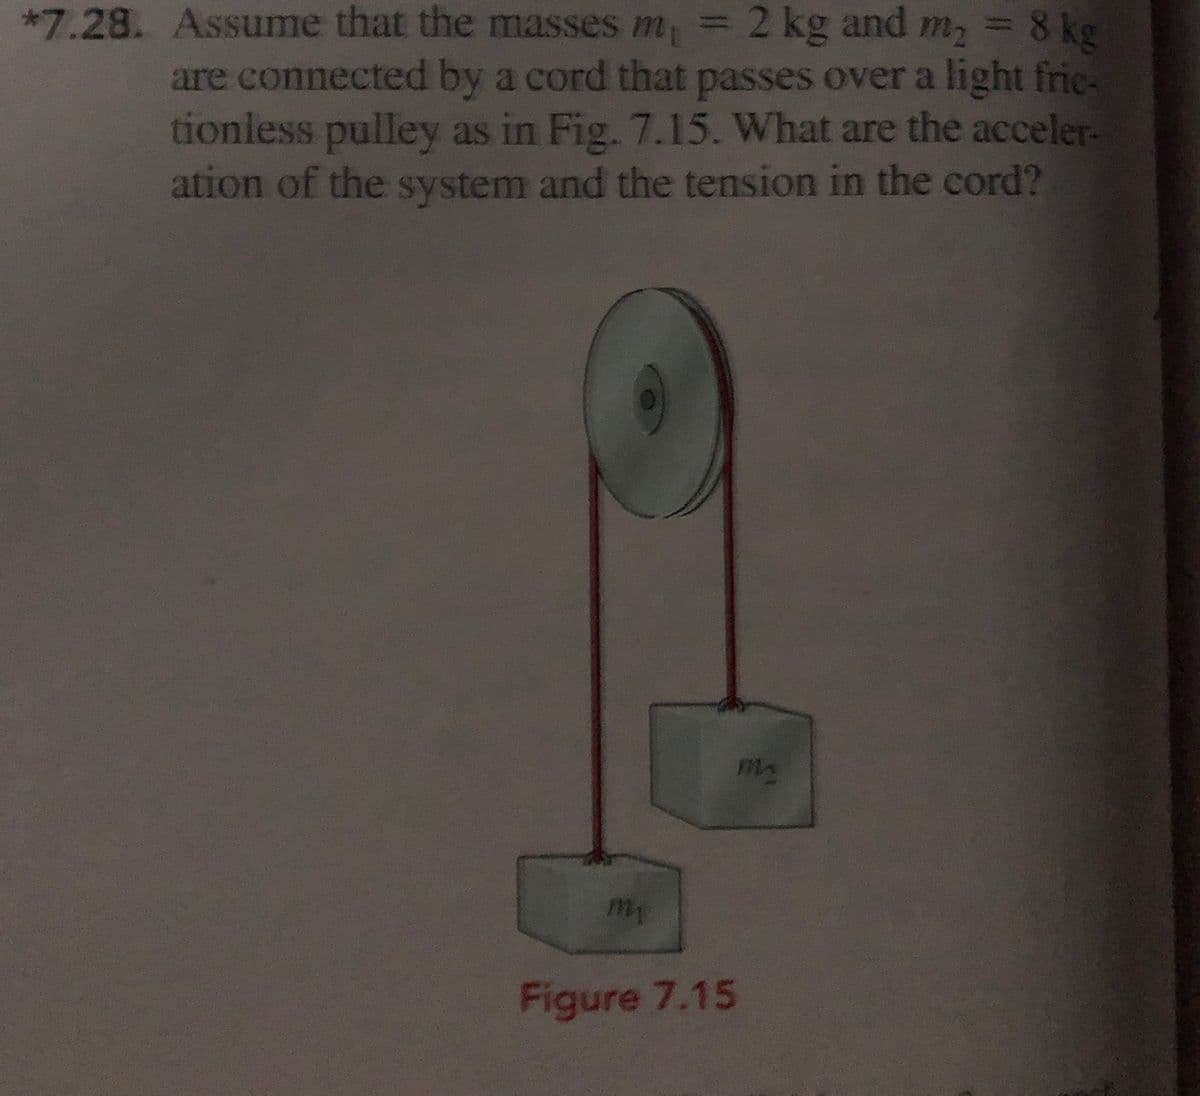 =
8 kg
m2
%3D
*7.28. Assume that the masses m, = 2 kg and
are connected by a cord that passes over a light fric-
tionless pulley as in Fig. 7.15. What are the acceler-
ation of the system and the tension in the cord?
Figure 7.15
